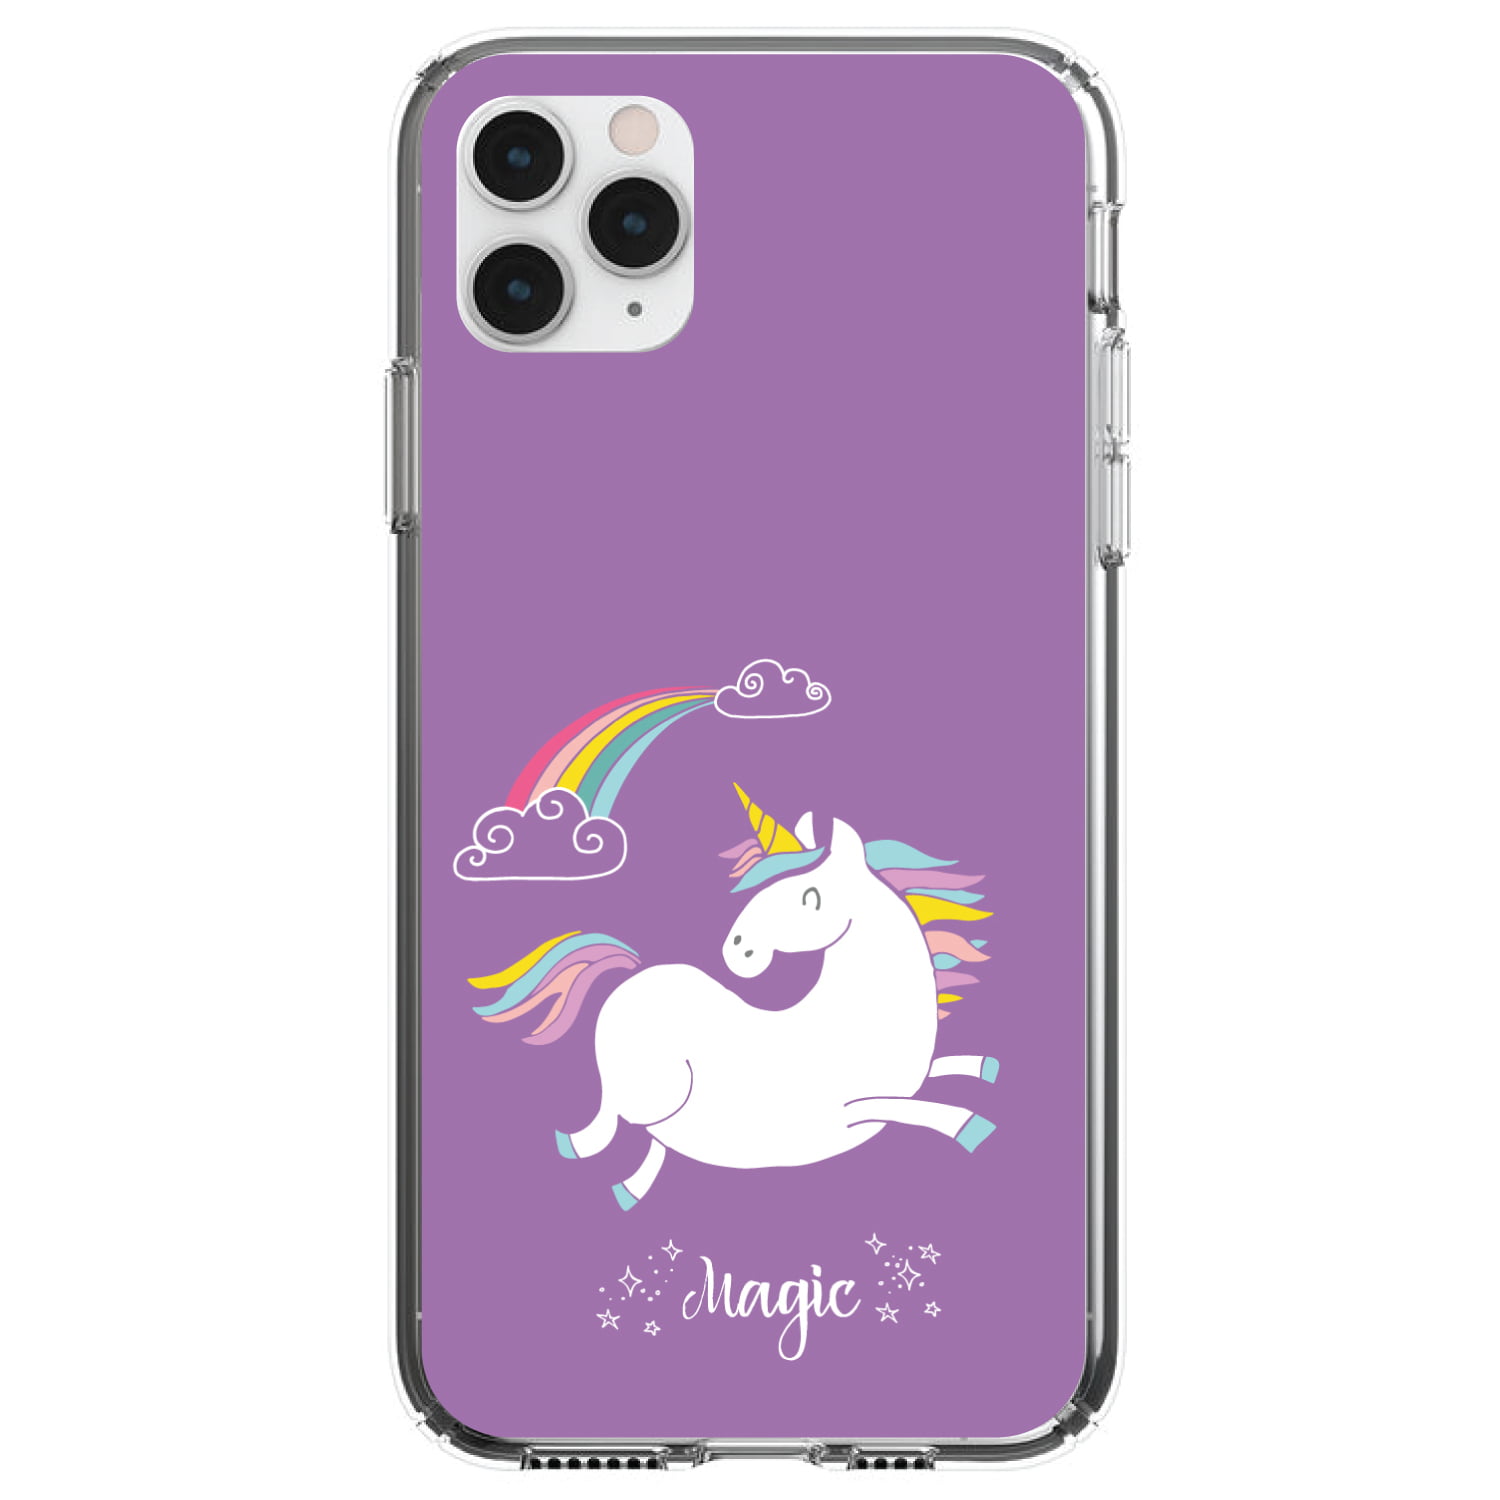 Galaxy S Clear Hybrid Shock Proof Case for iPhone Unicorns and Rainbows Pattern Pixel Glass Screen Protector Galaxy Note